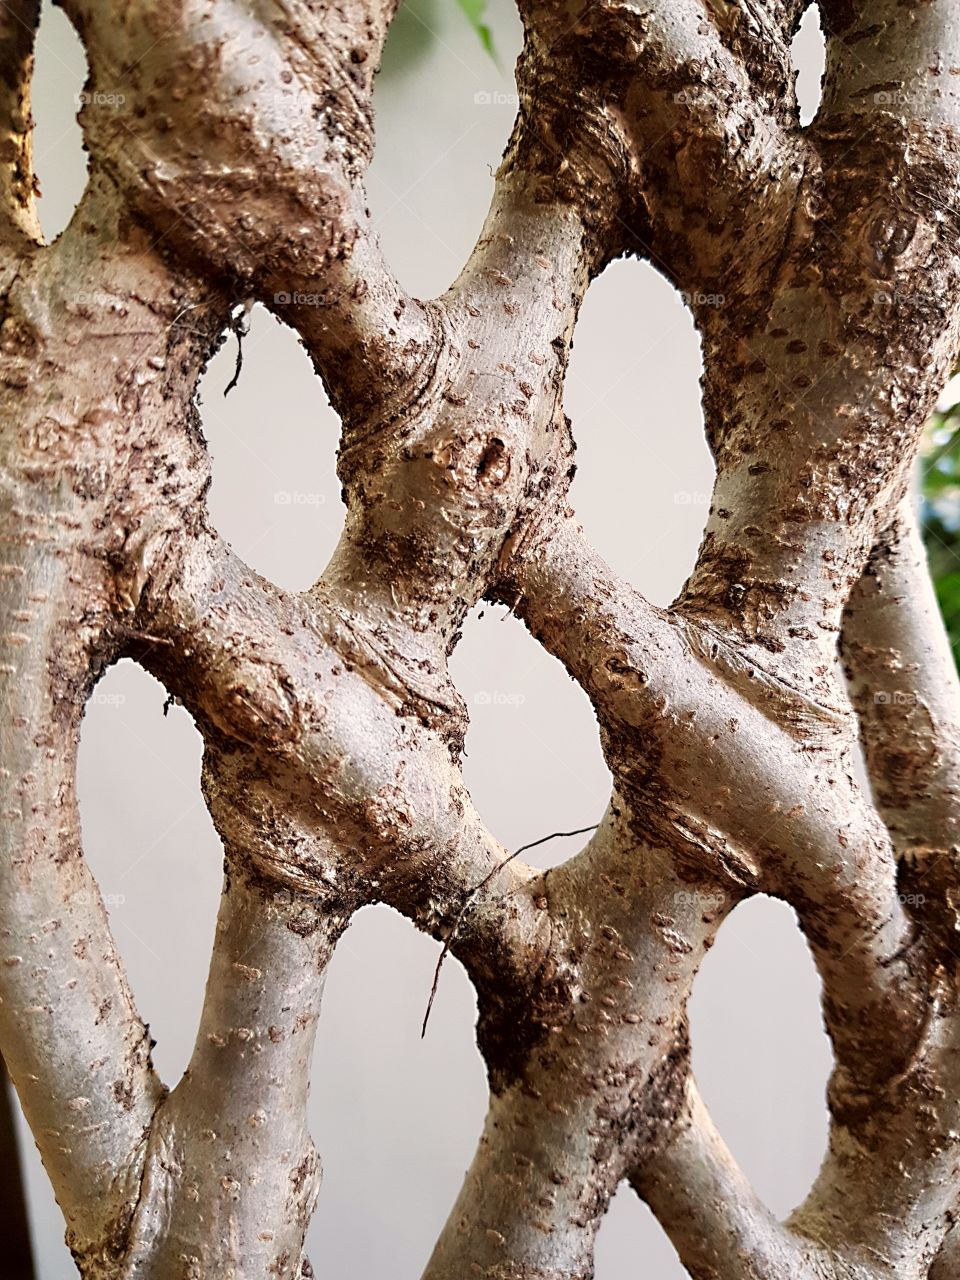 Decorative braided trunk of ficus. Texture of a tree close-up.